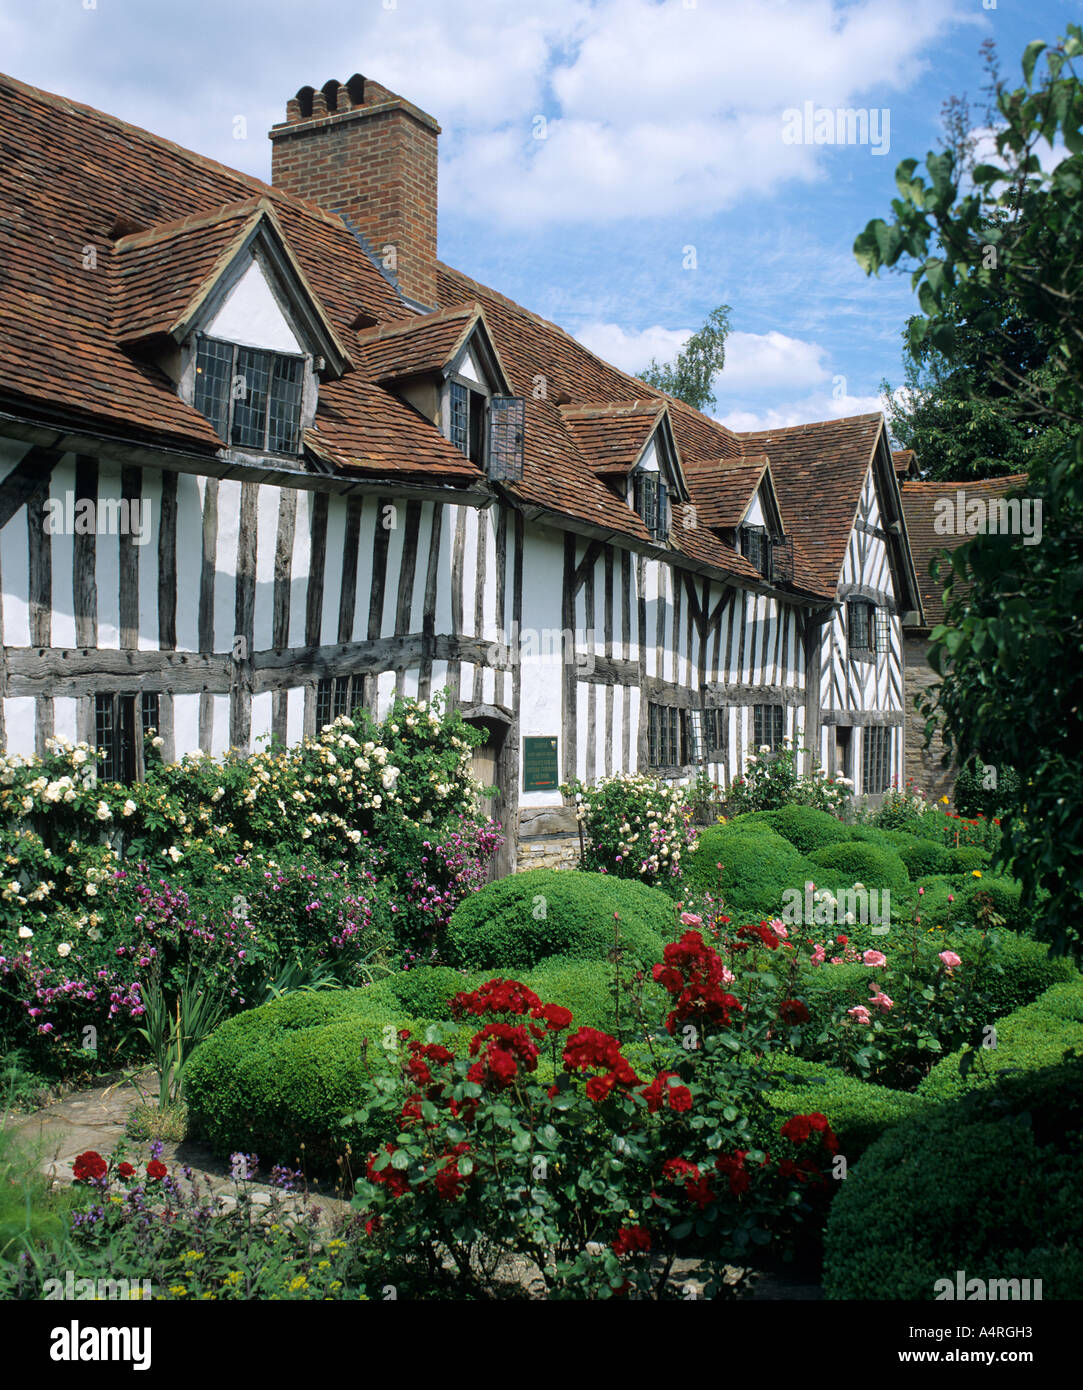 Mary Arden's House, Stratford upon Avon, Angleterre. Banque D'Images